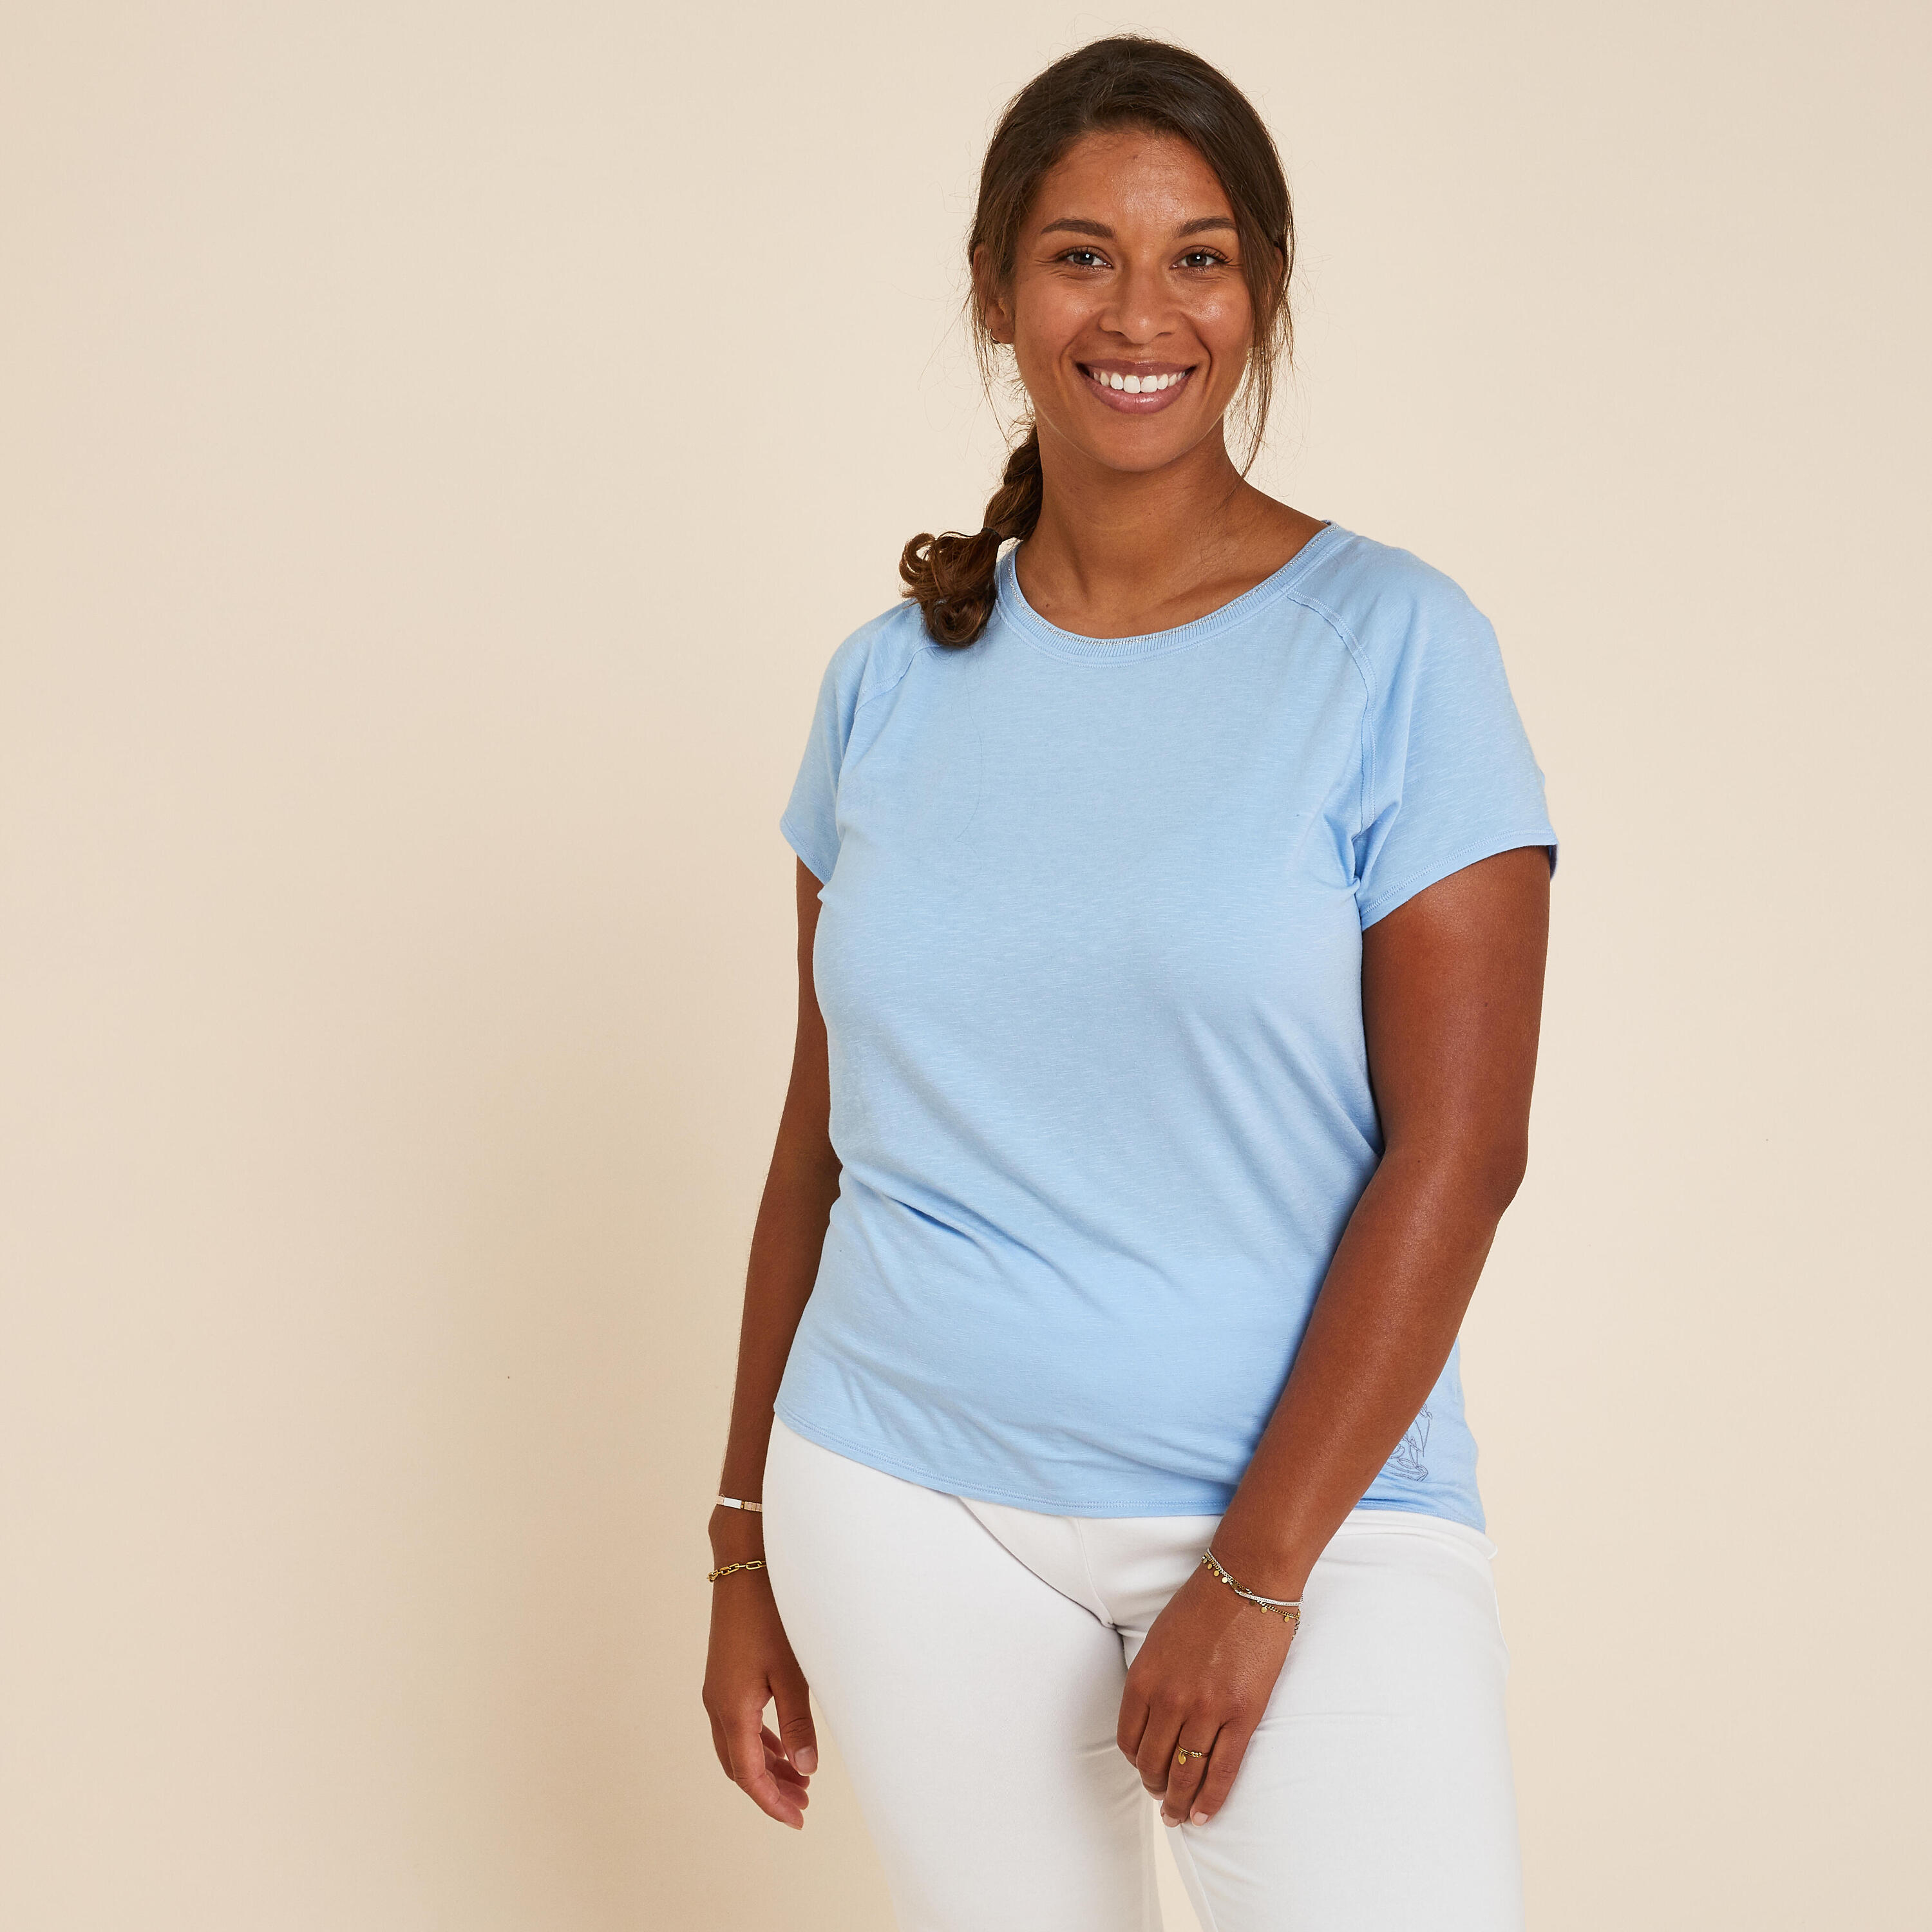 KIMJALY Women's Gentle Yoga T-Shirt - Sky Blue Embroidery